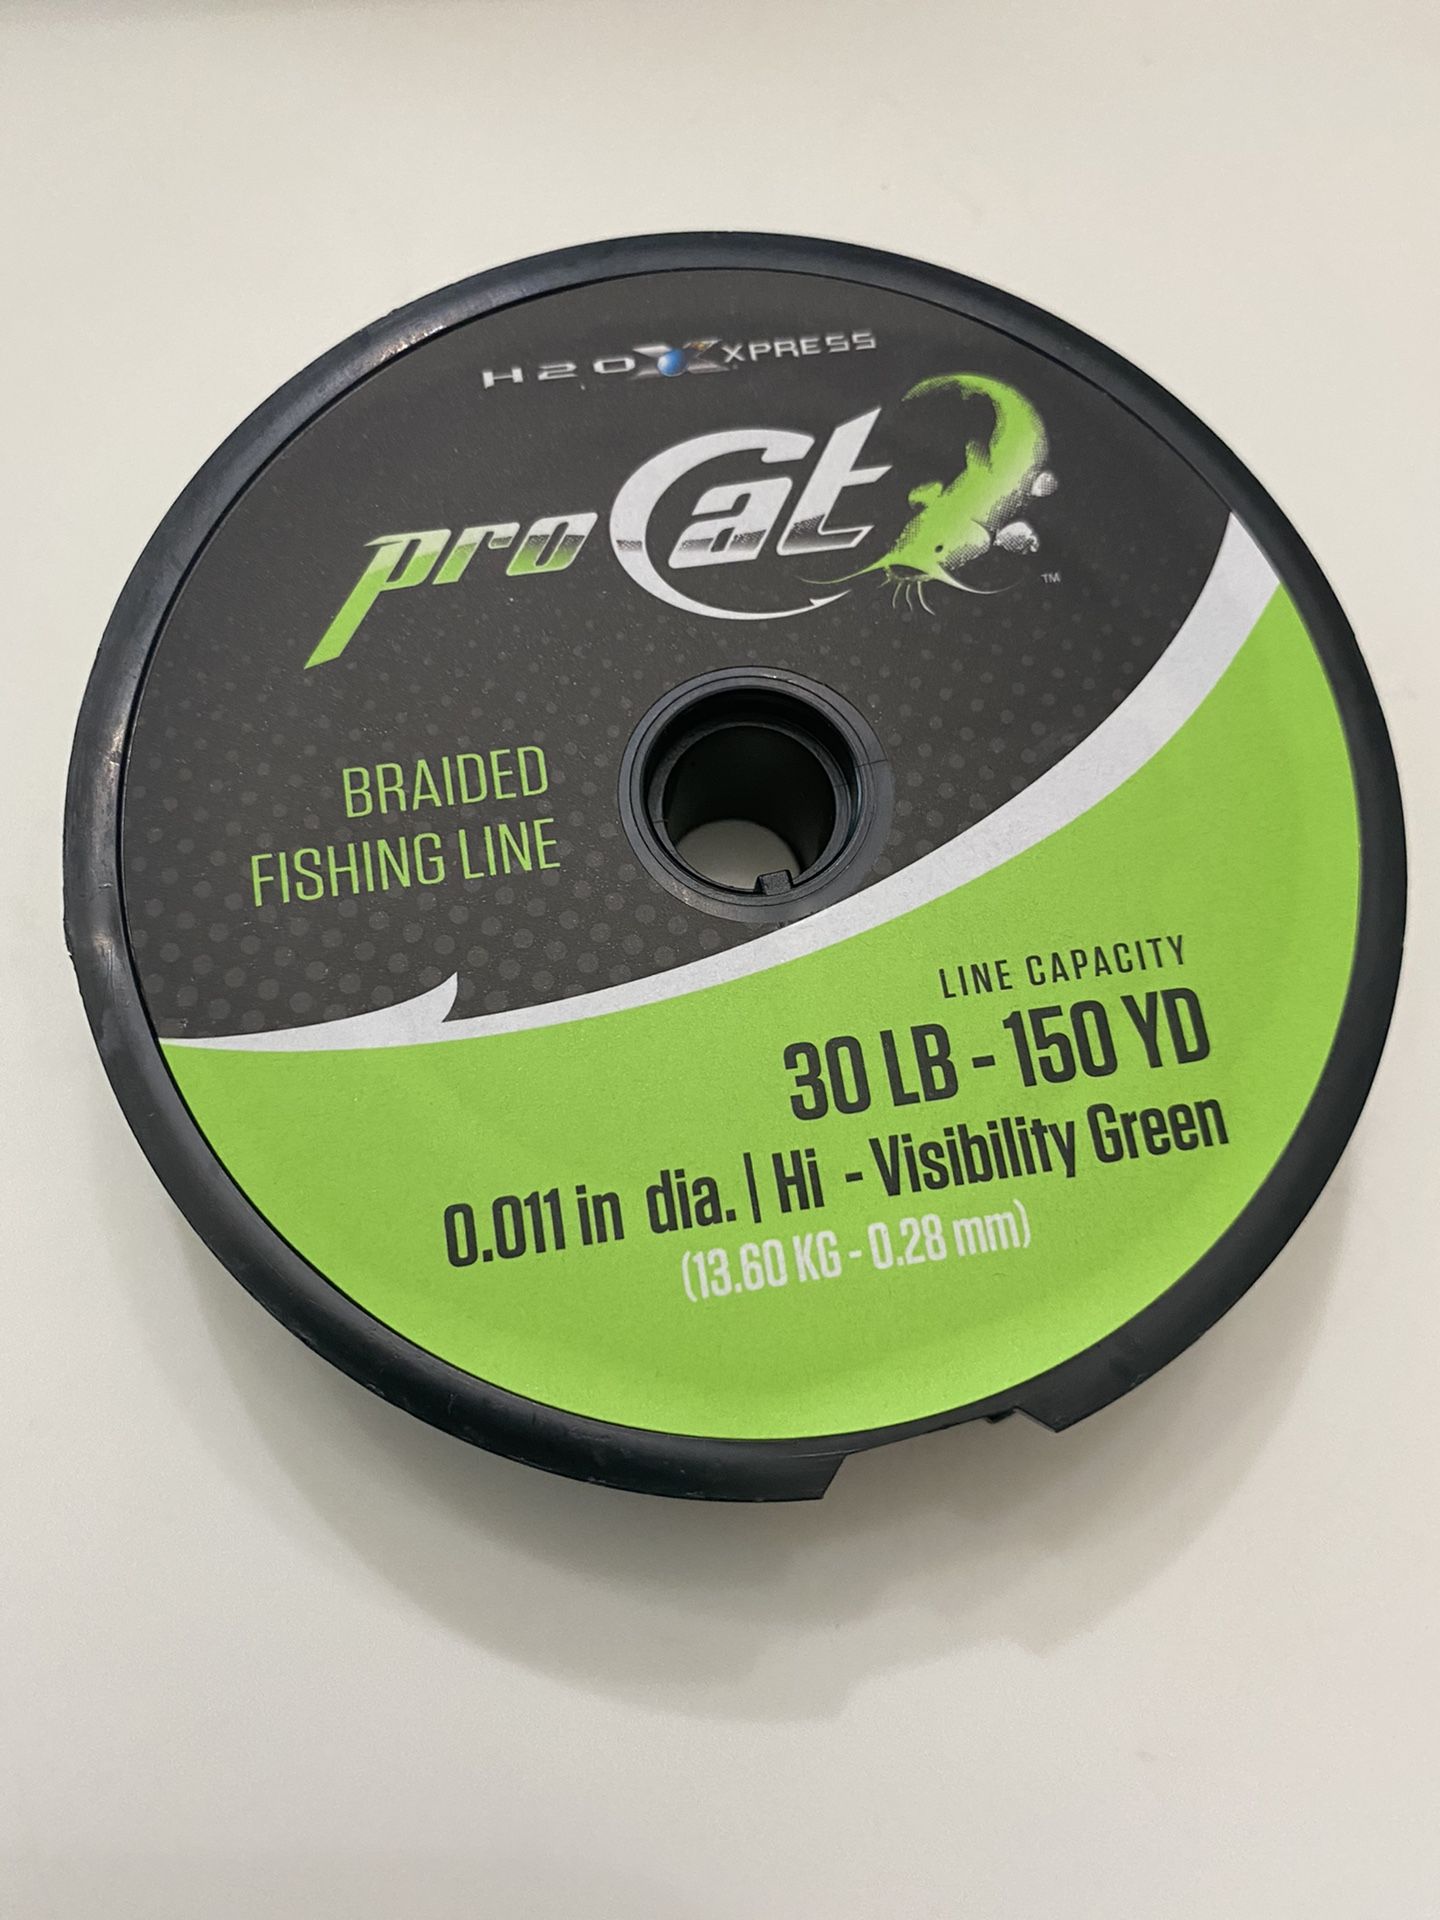 NEW Pro Cat Braided Fishing Line 30 lb for Sale in Alvin, TX - OfferUp